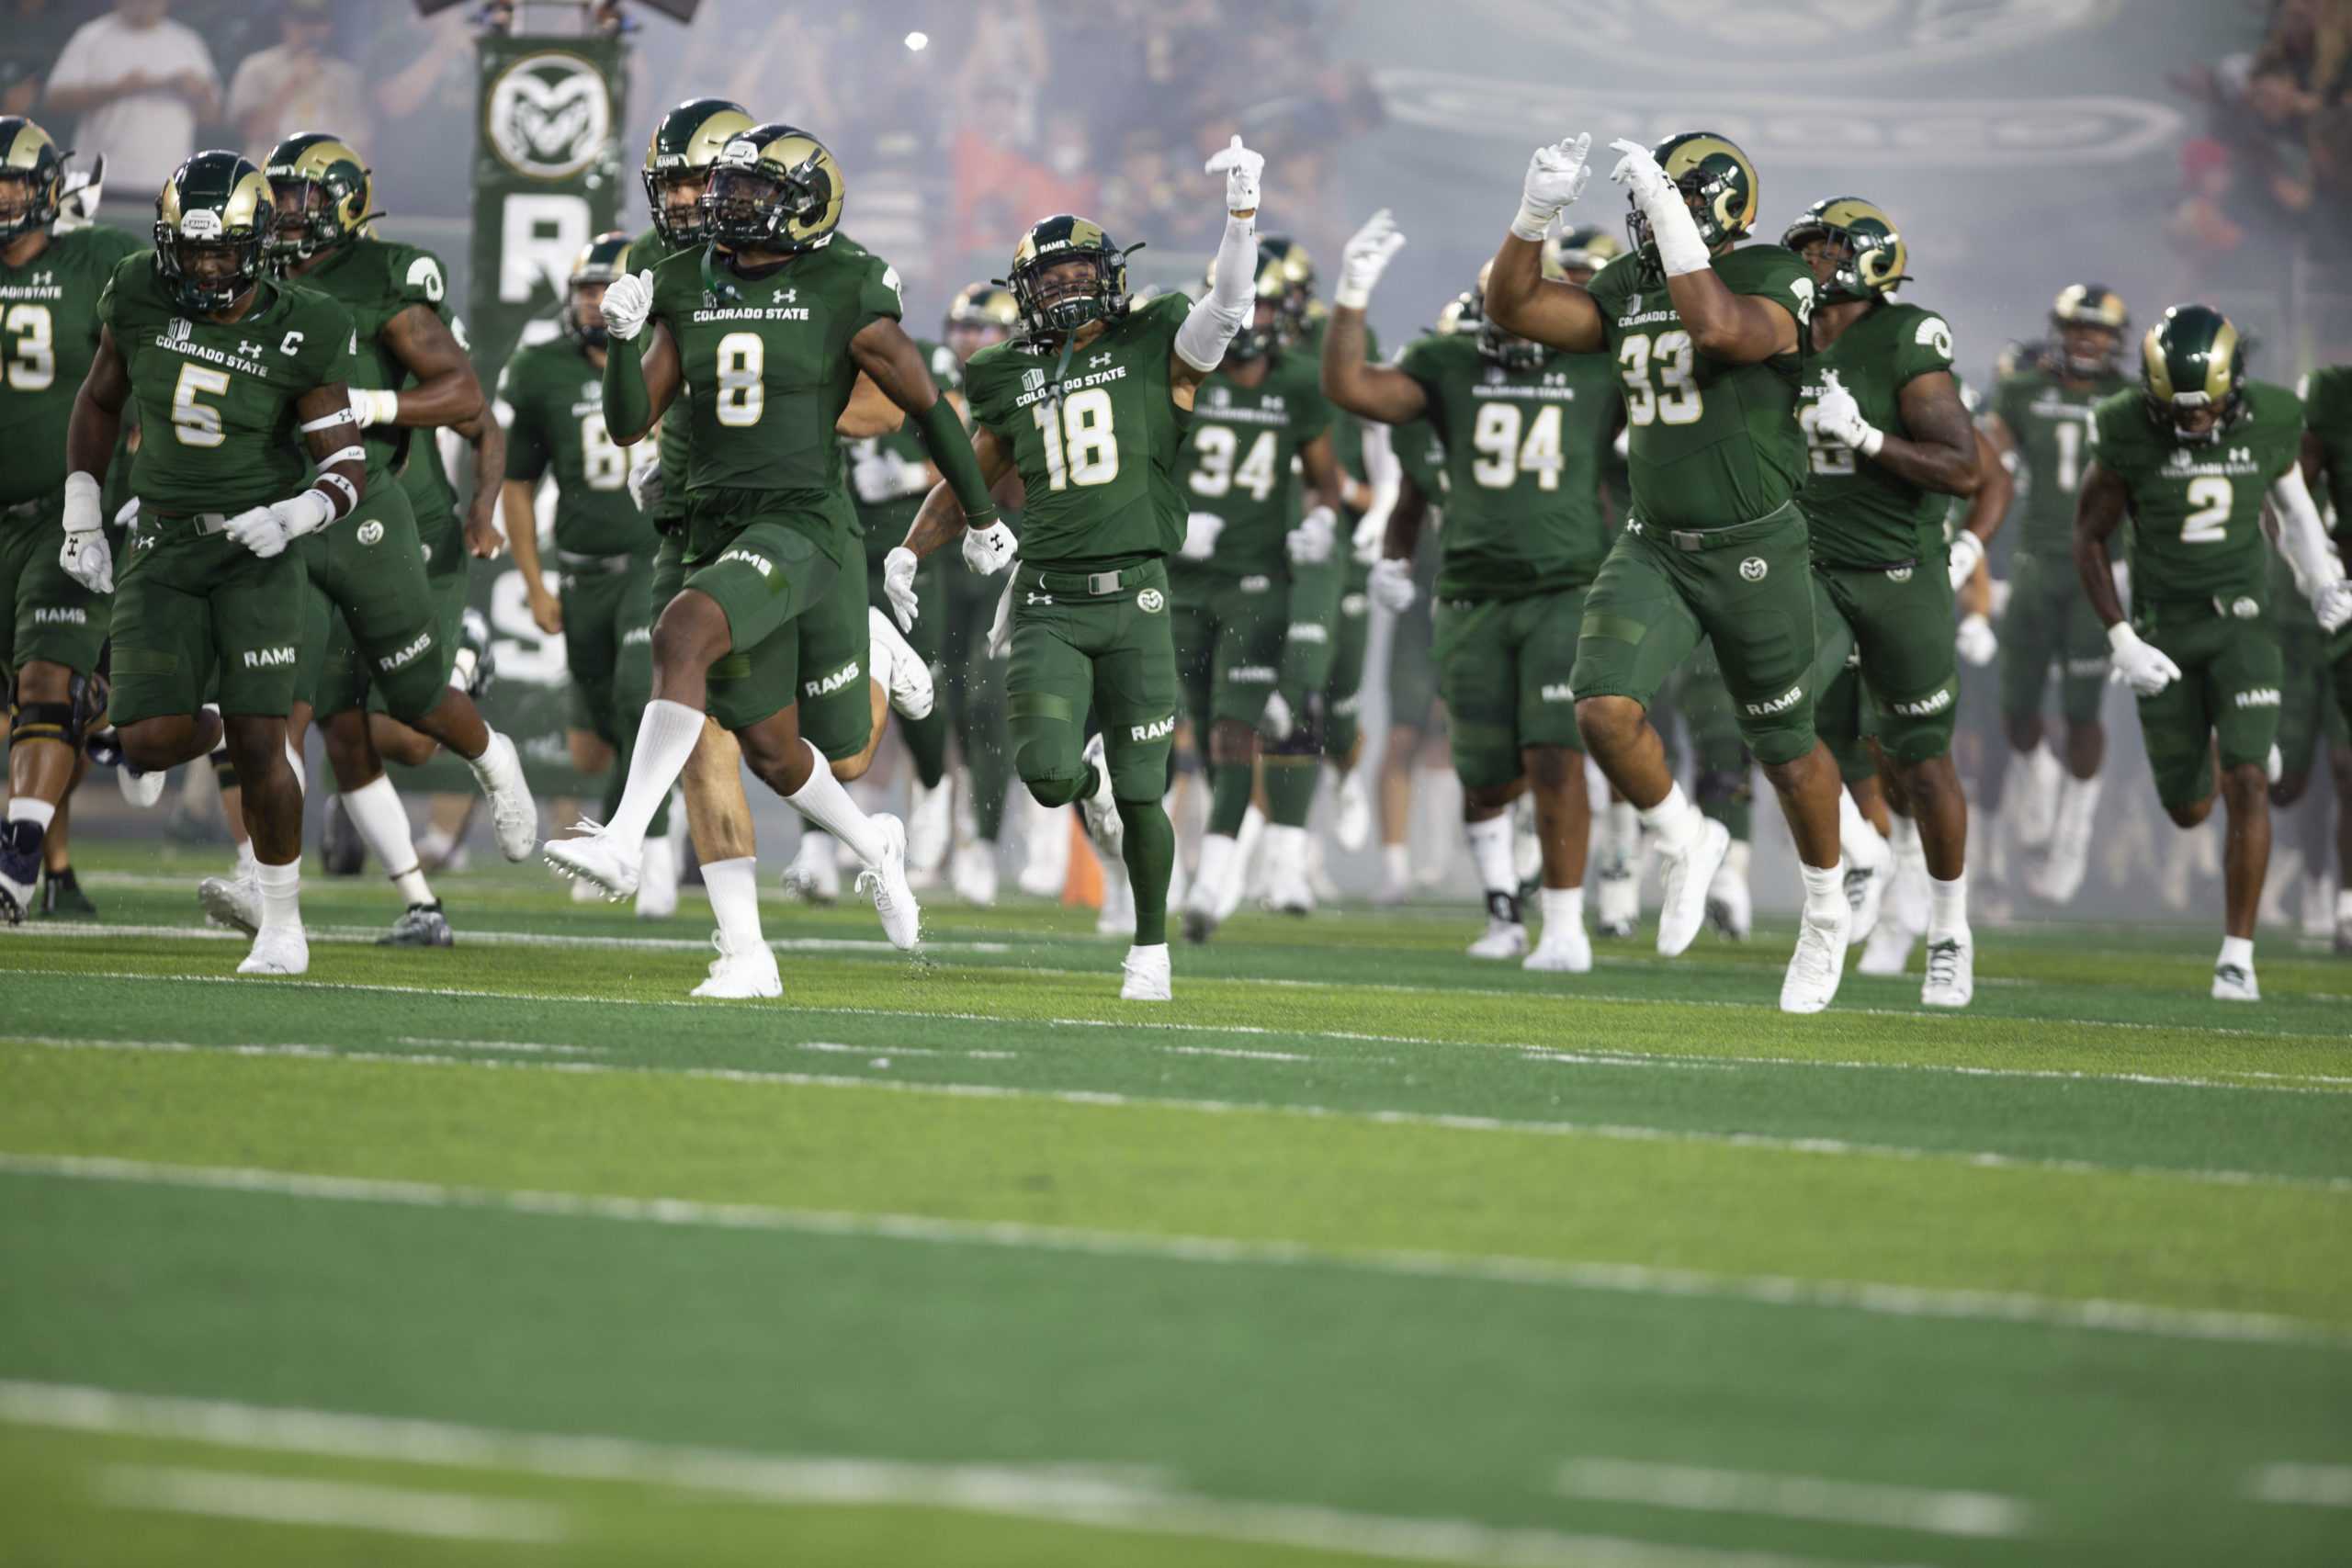 The Colorado State football team taking the field at Canvas Stadium